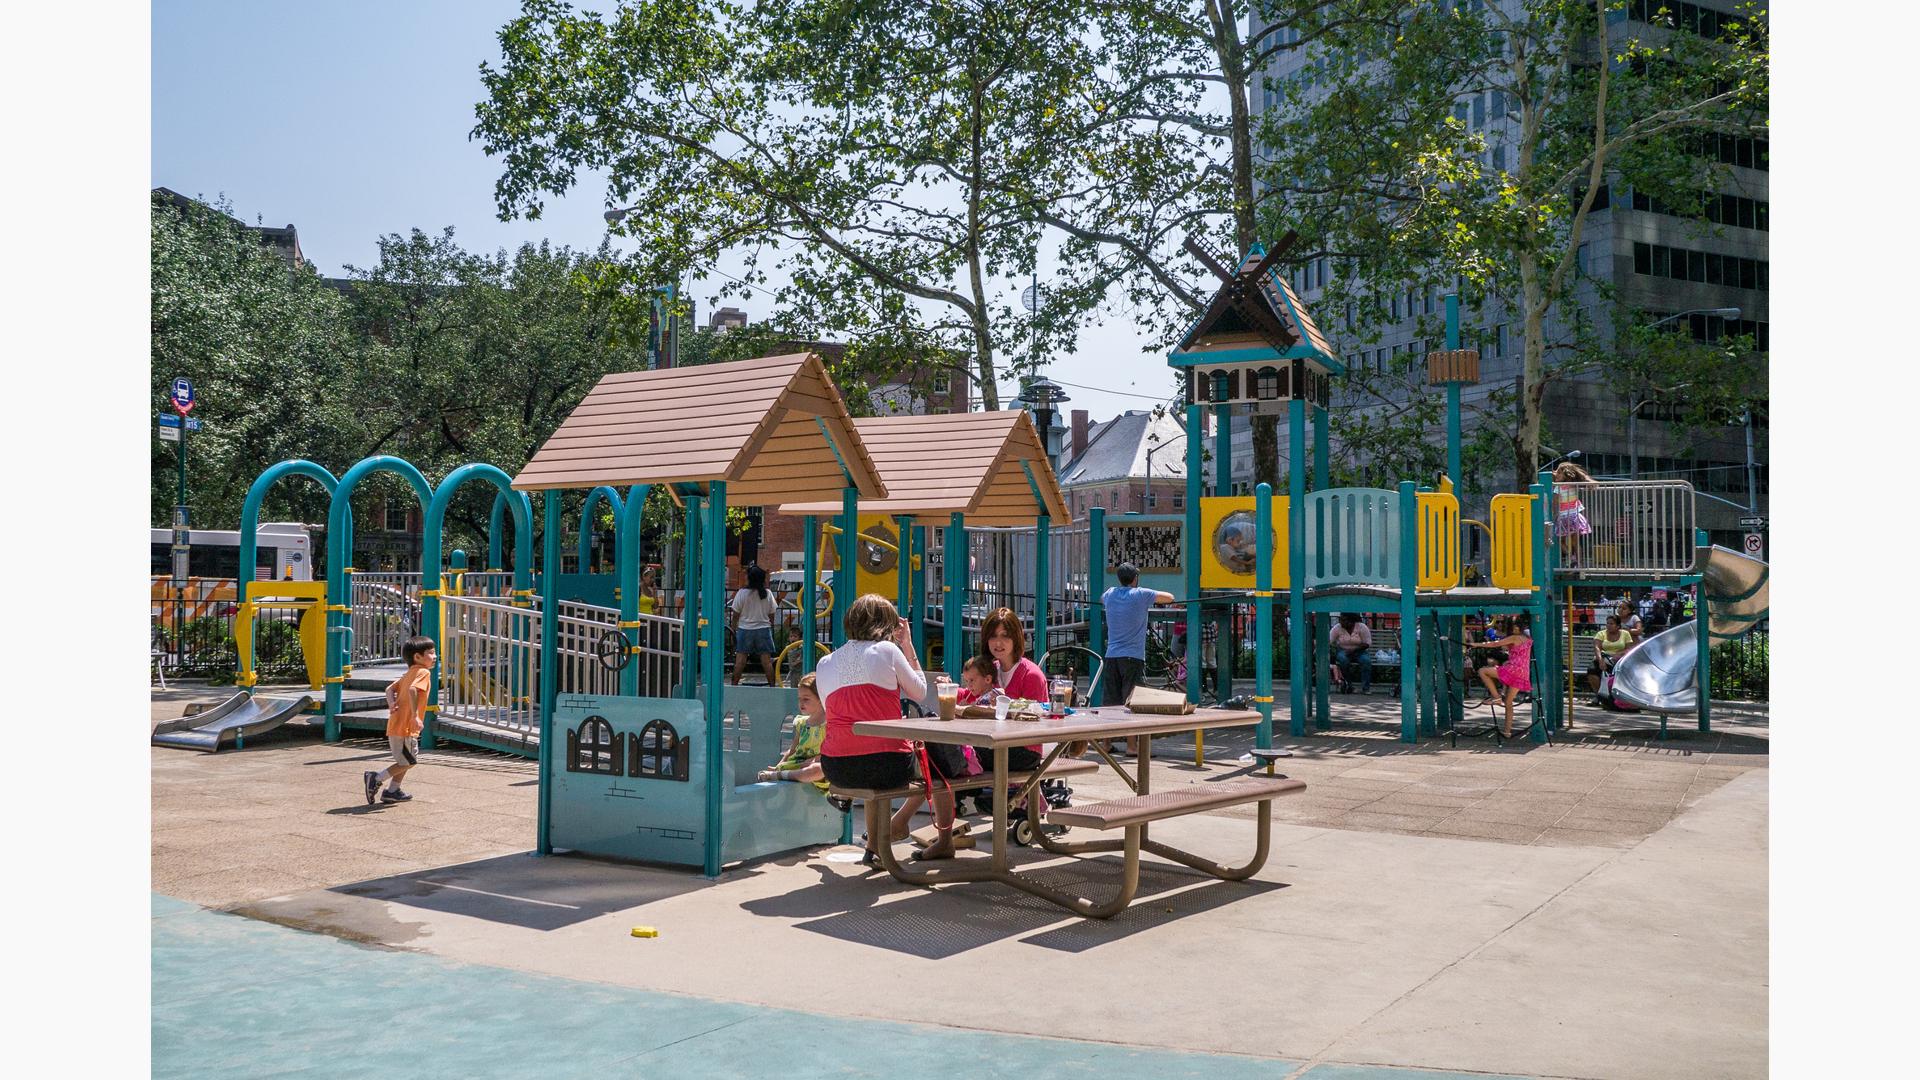 A mother on a bench has lunch with her son while visiting the Pearl Street Playground in New York City. Other parents watch as their children play on the playground in the background.